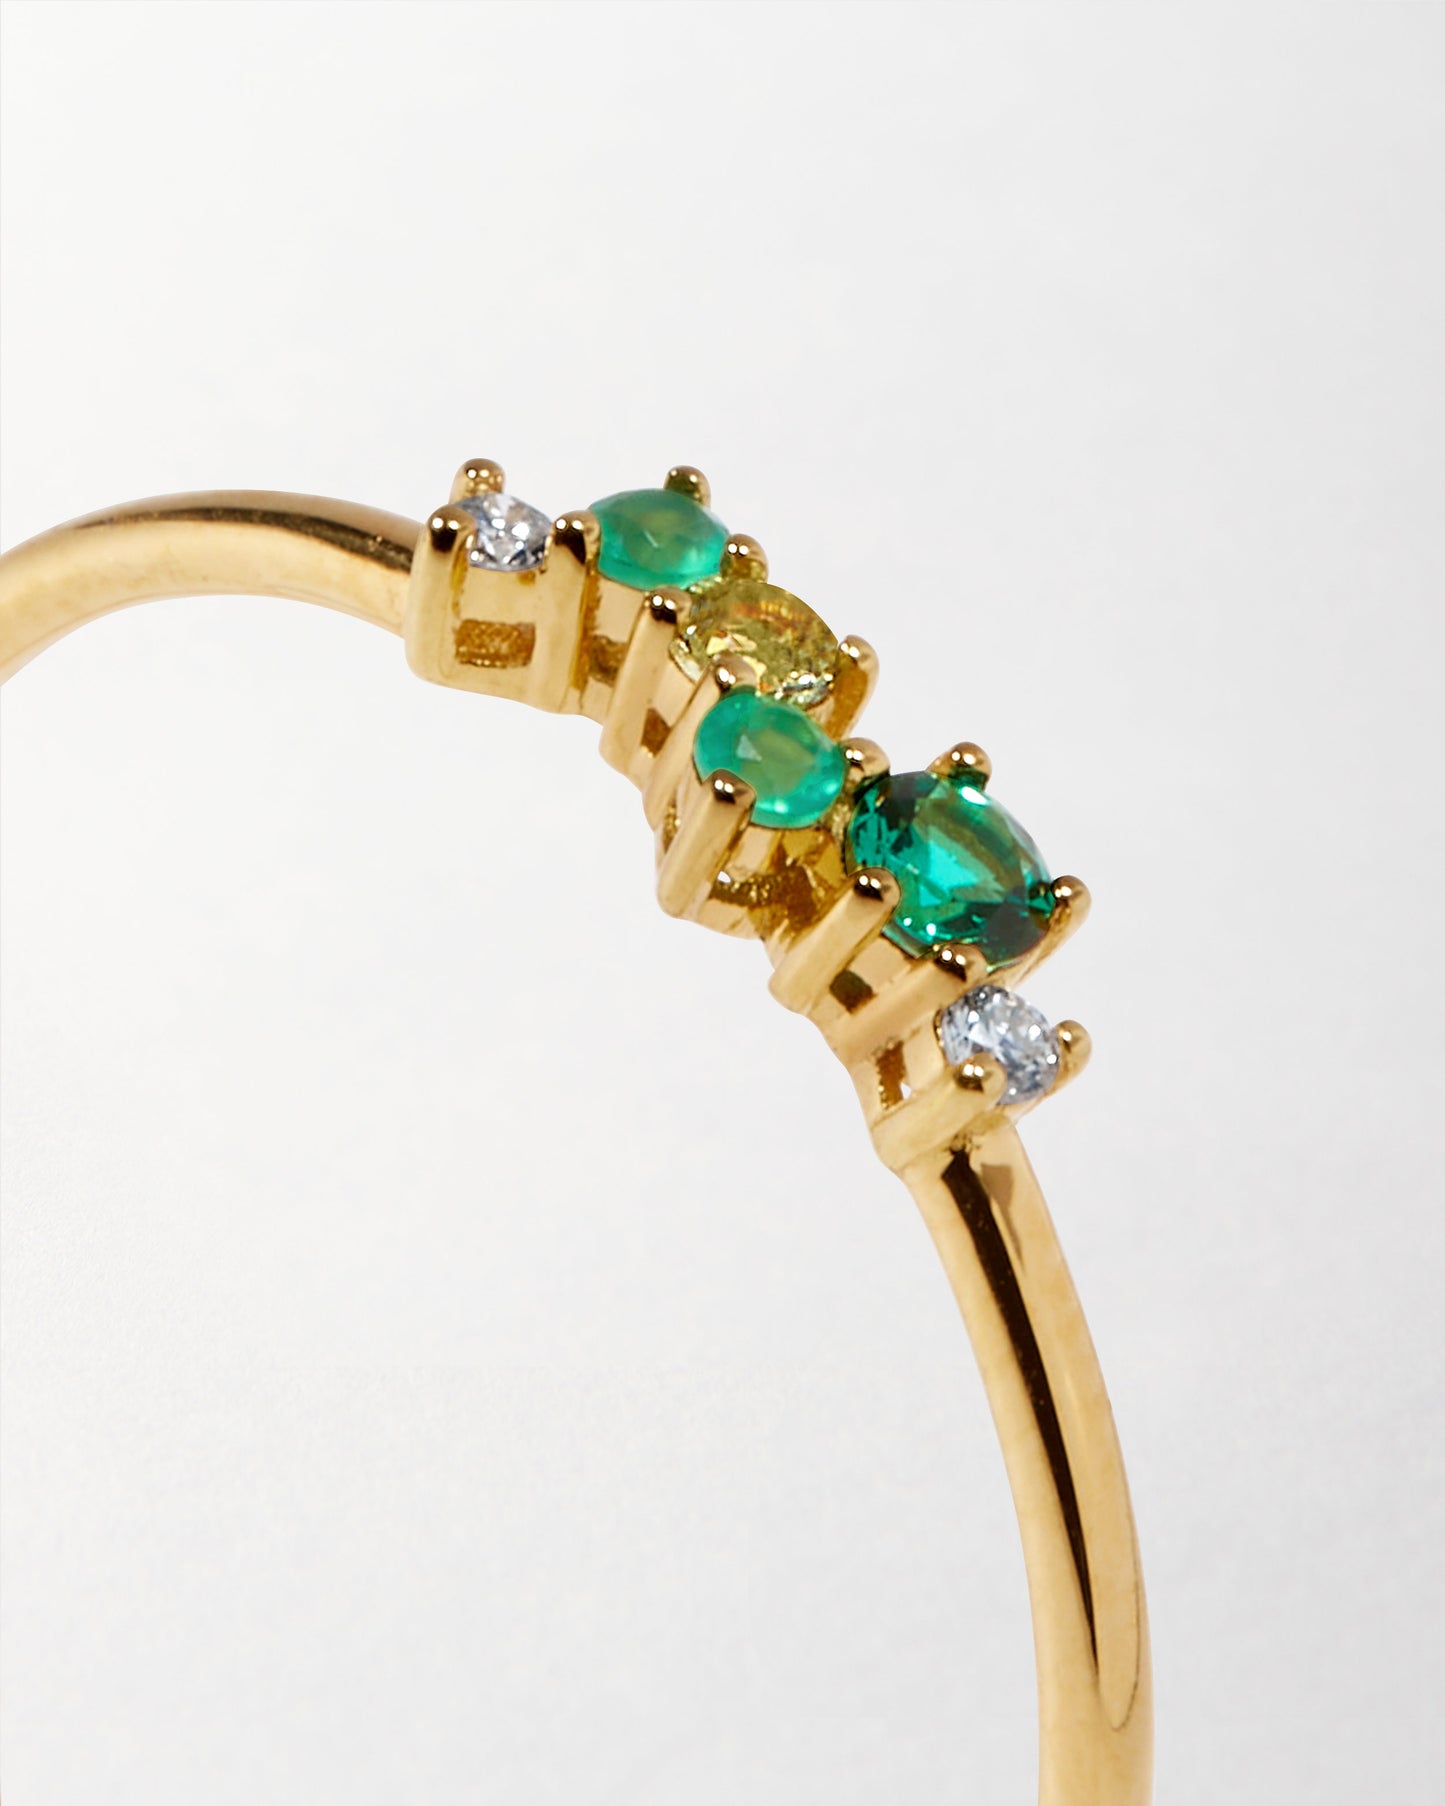 Intuition Emerald Ray Ring